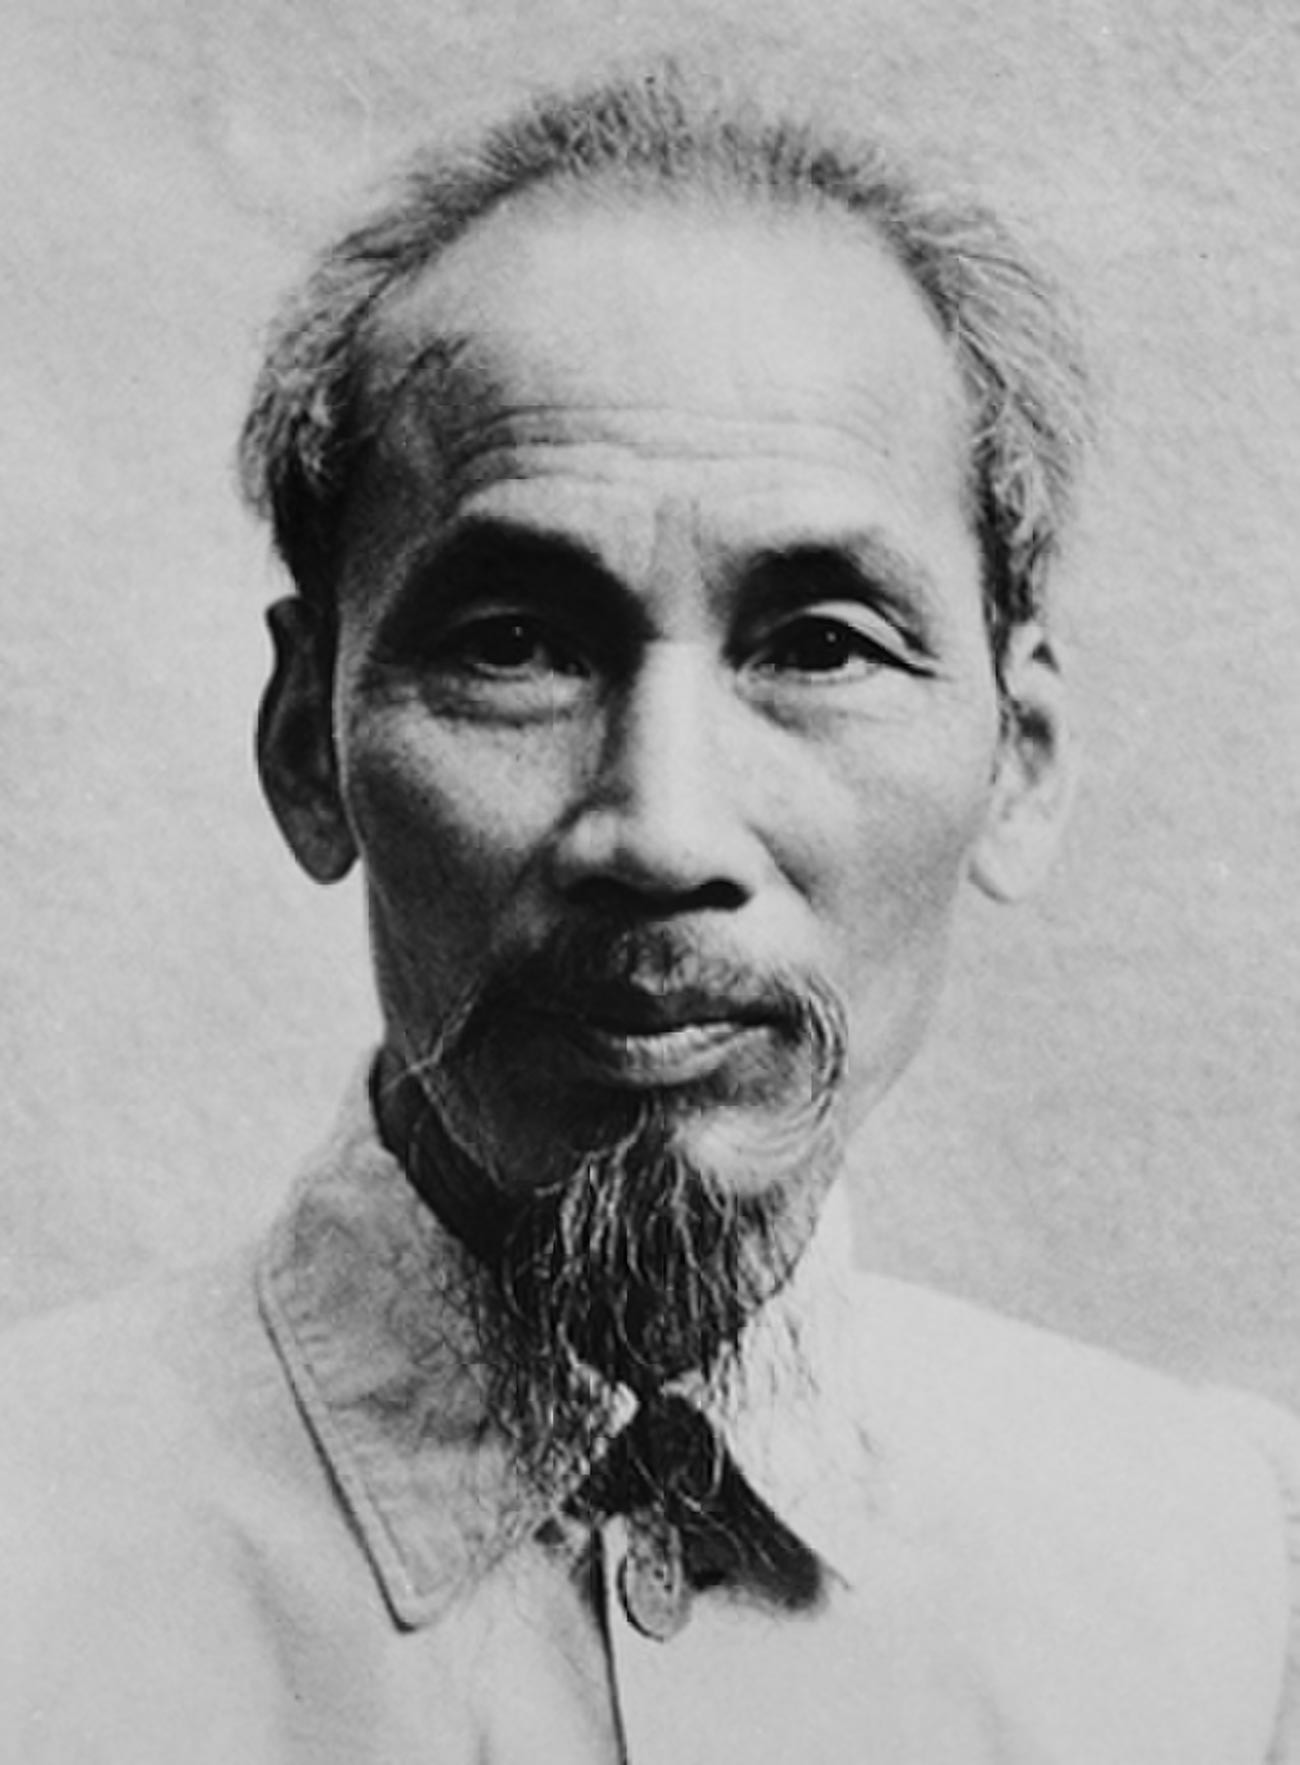 Ho Chi Minh also stayed in the hotel.